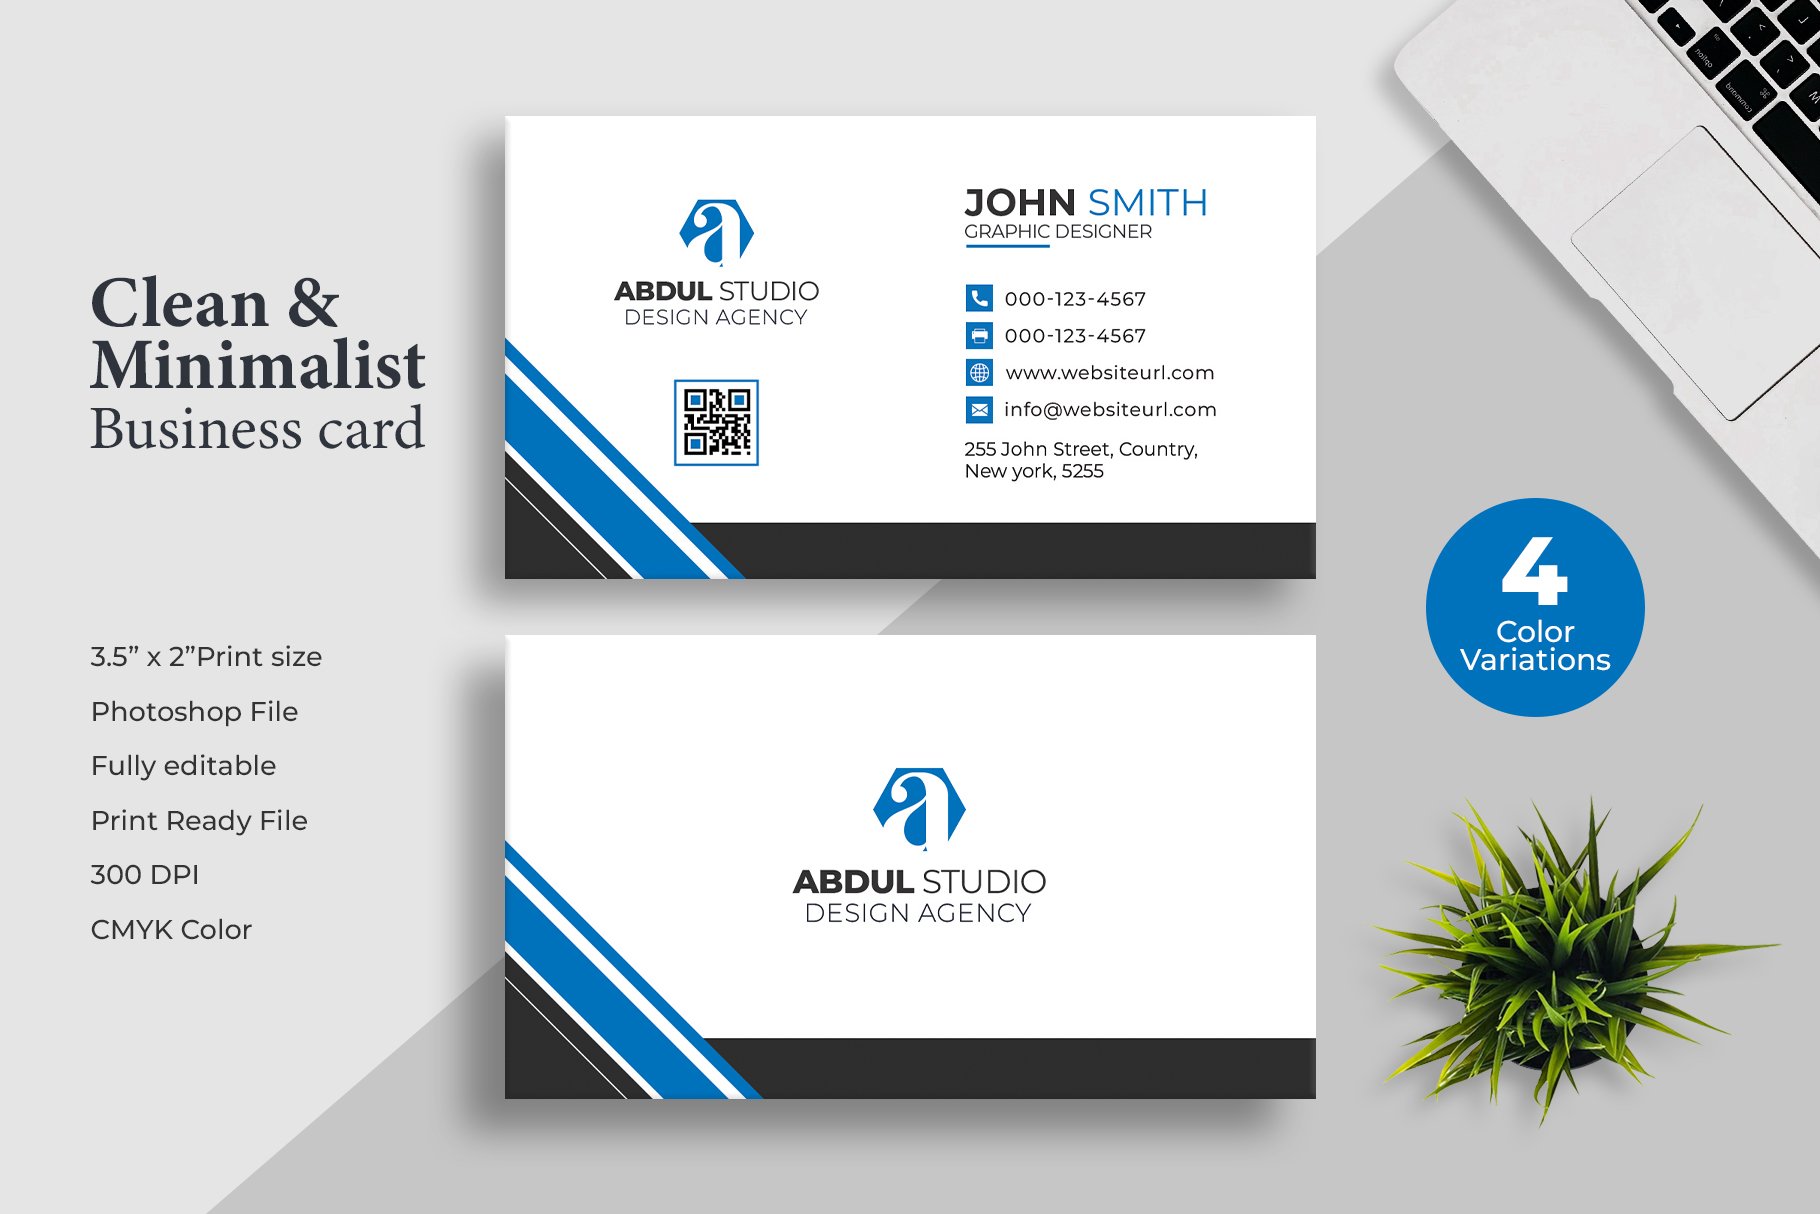 front and back business card template